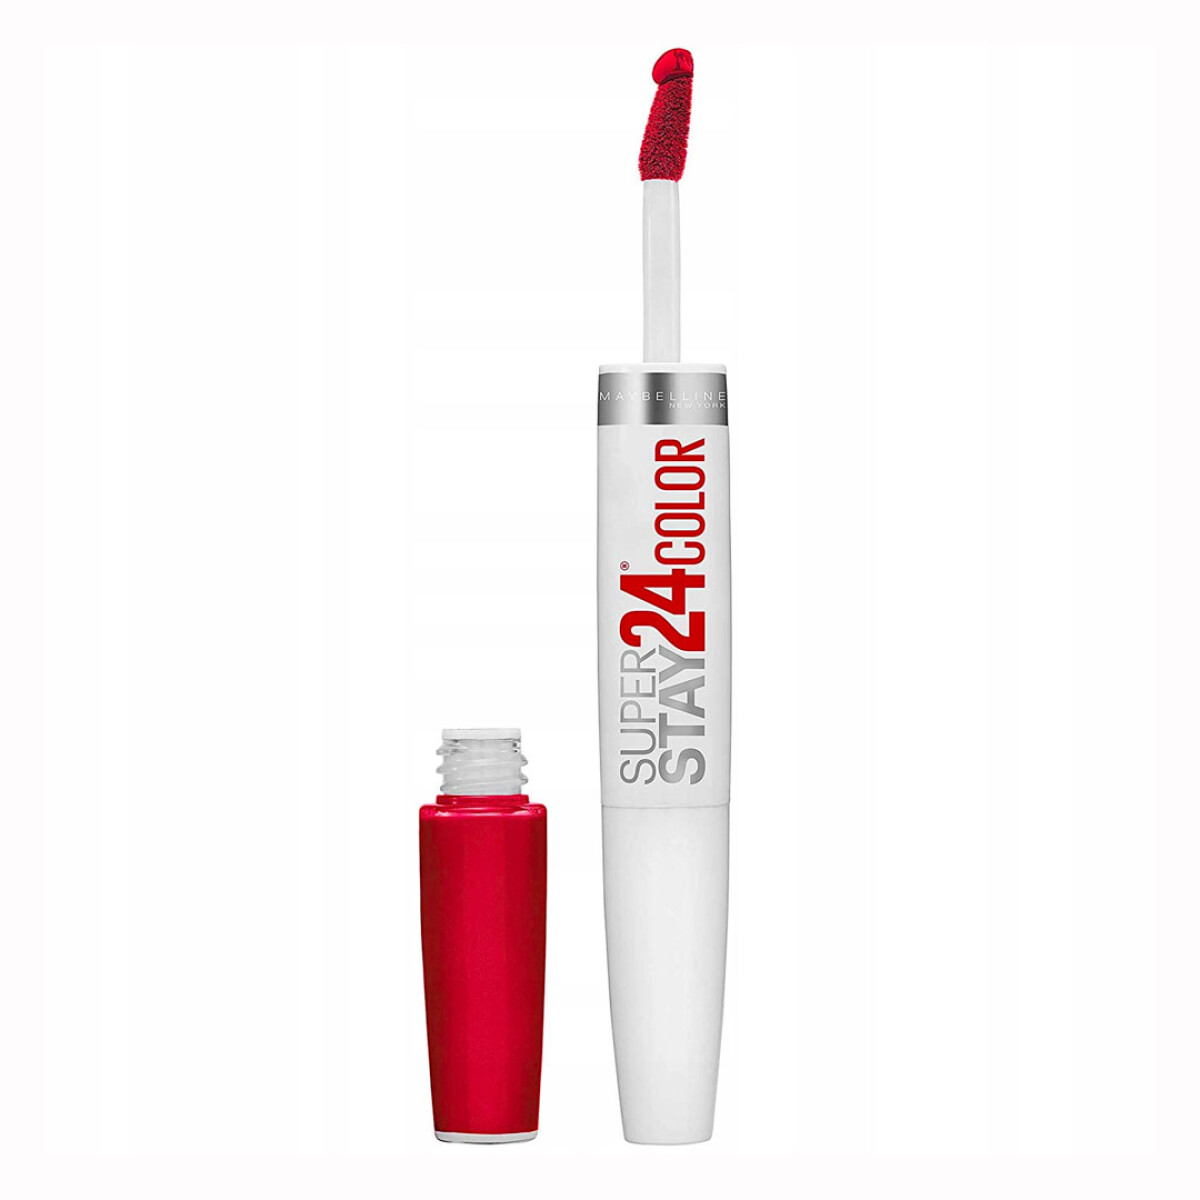 Labial Liquido Maybelline Superstay 24 hrs - Optic Ruby nº300 